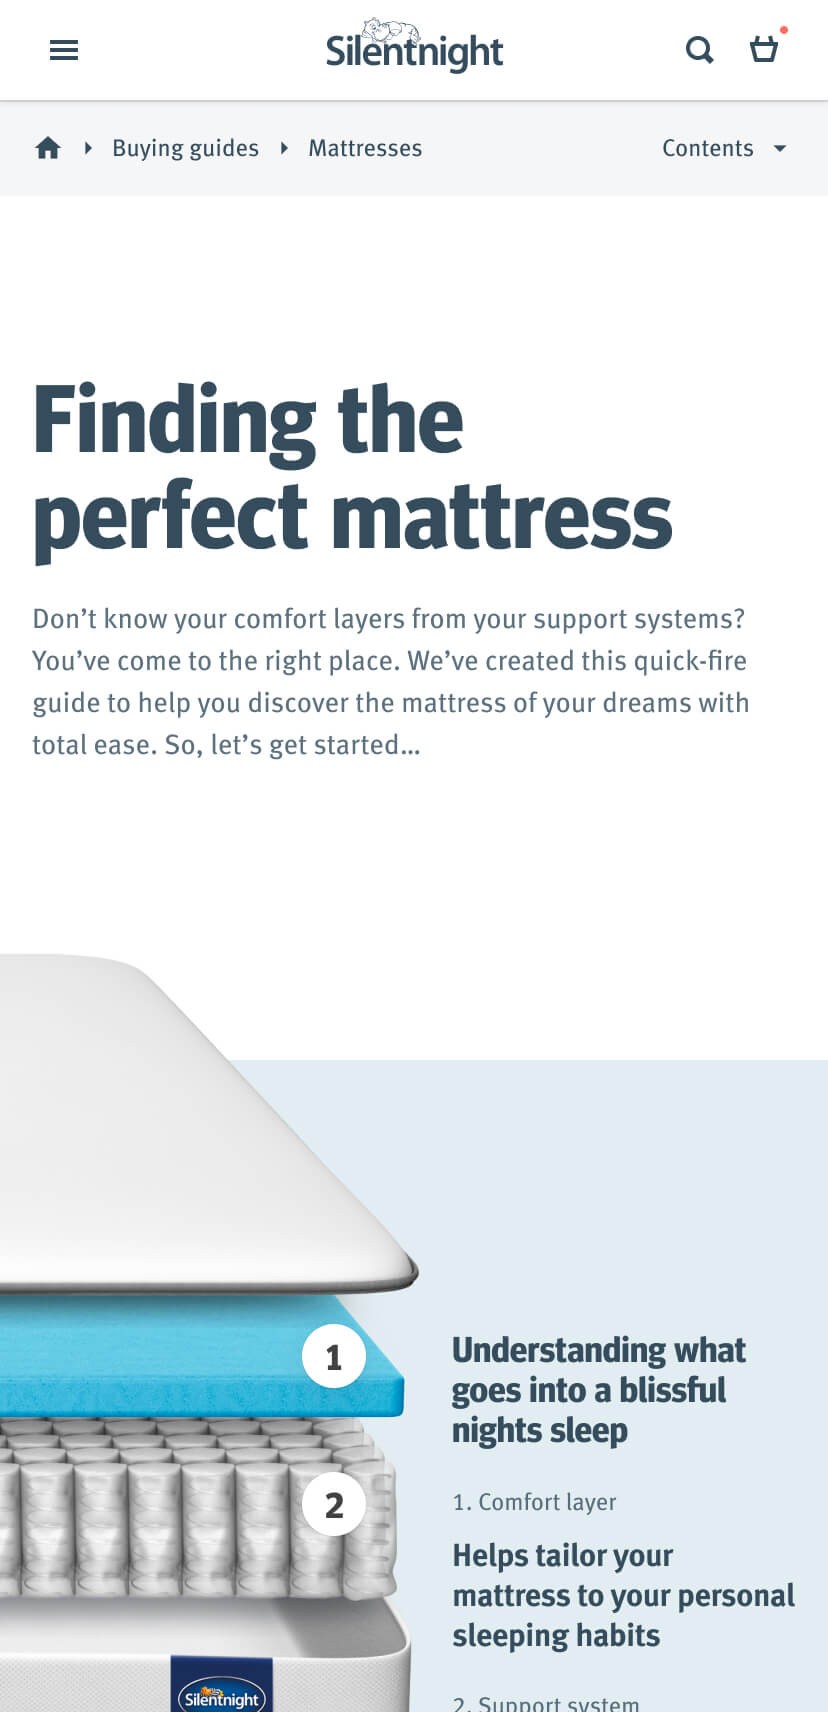 The mobile version of the introduction for the mattresses buying guide.